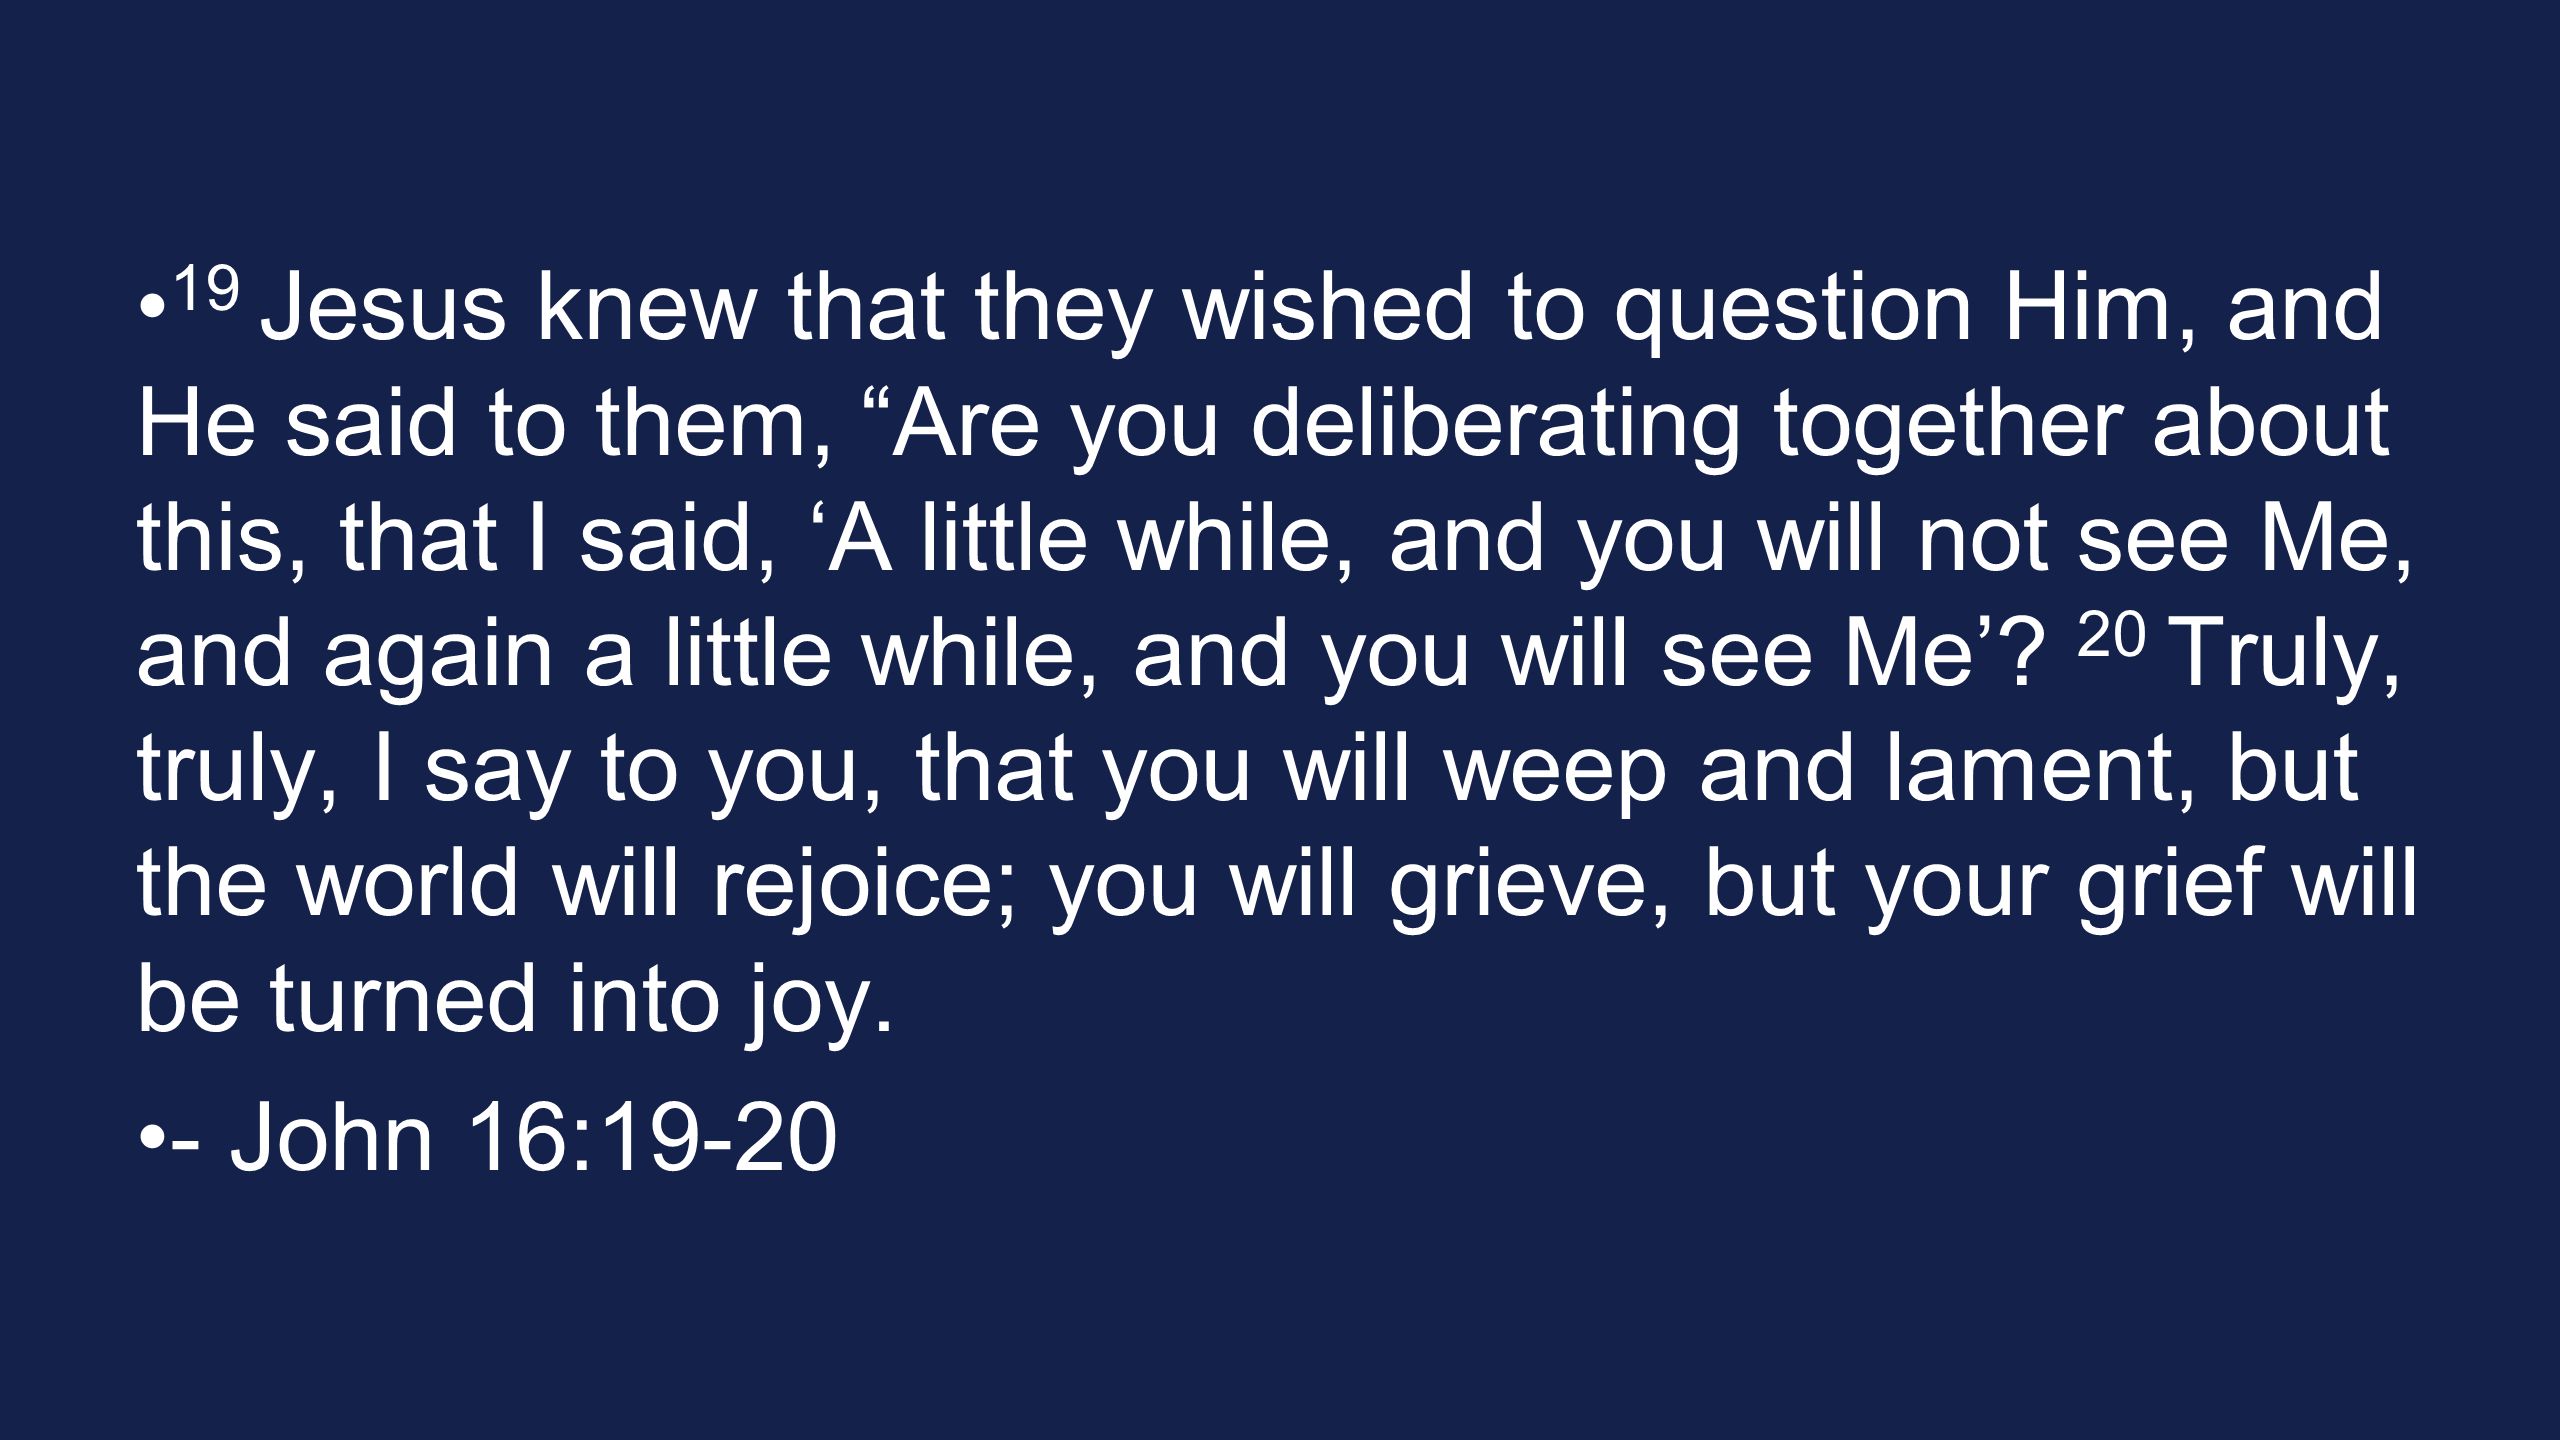 19 Jesus knew that they wished to question Him, and He said to them, Are you deliberating together about this, that I said, ‘A little while, and you will not see Me, and again a little while, and you will see Me’.